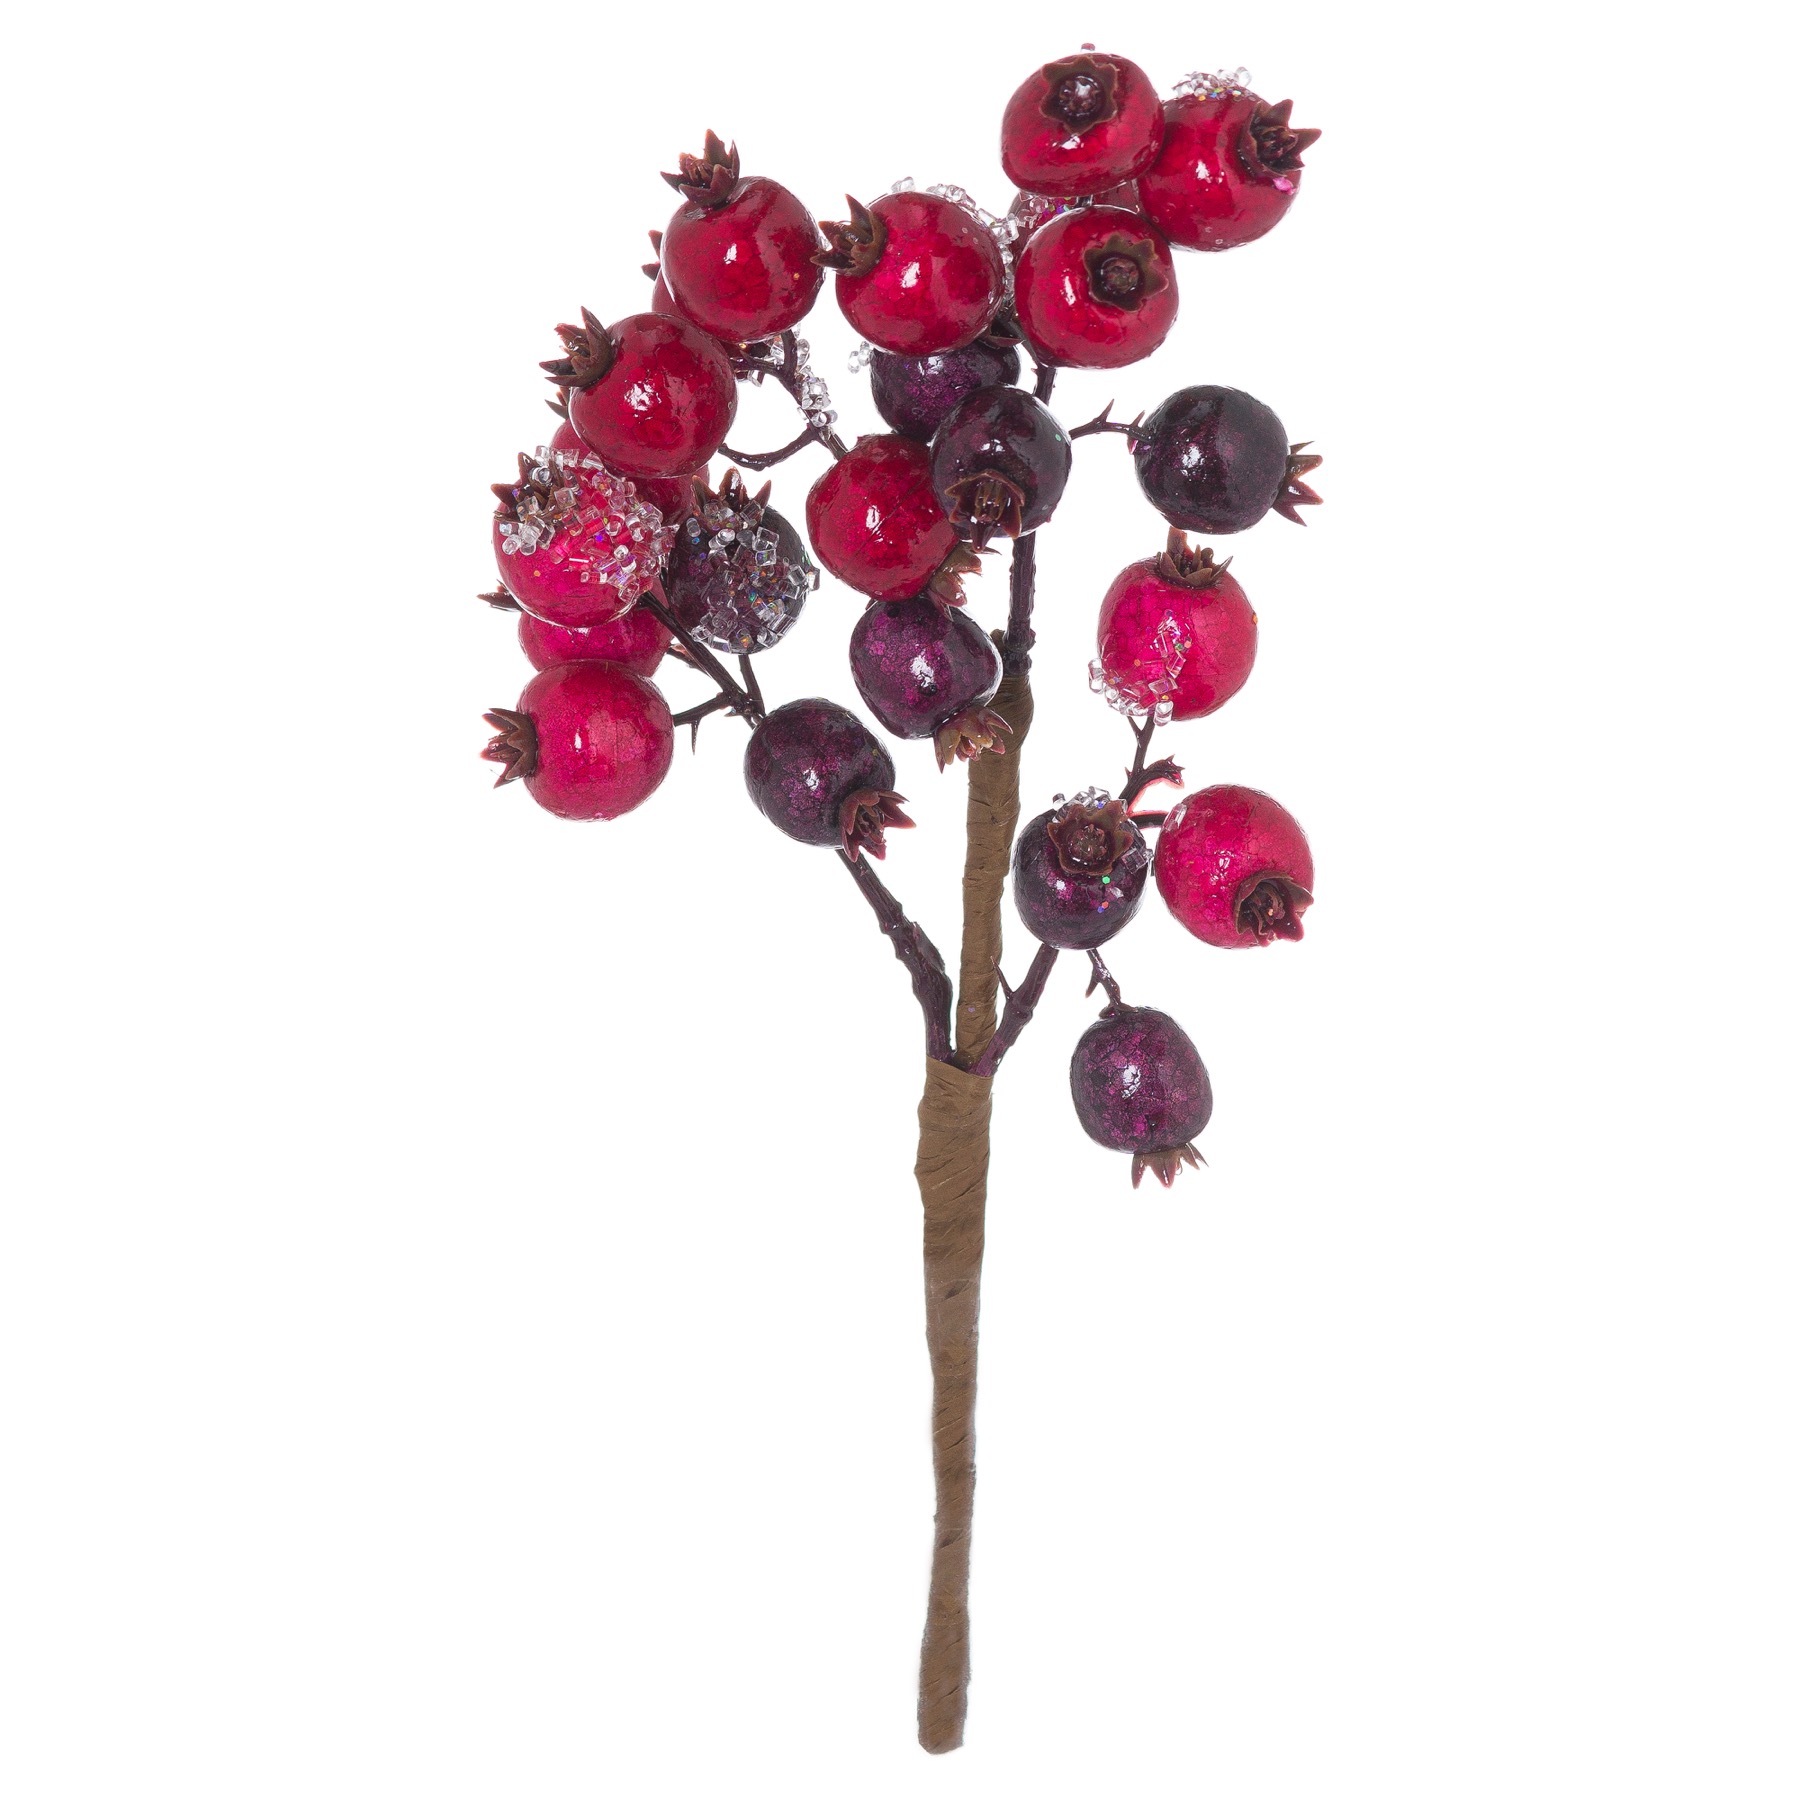 Fat Red Berry Pick - Image 1